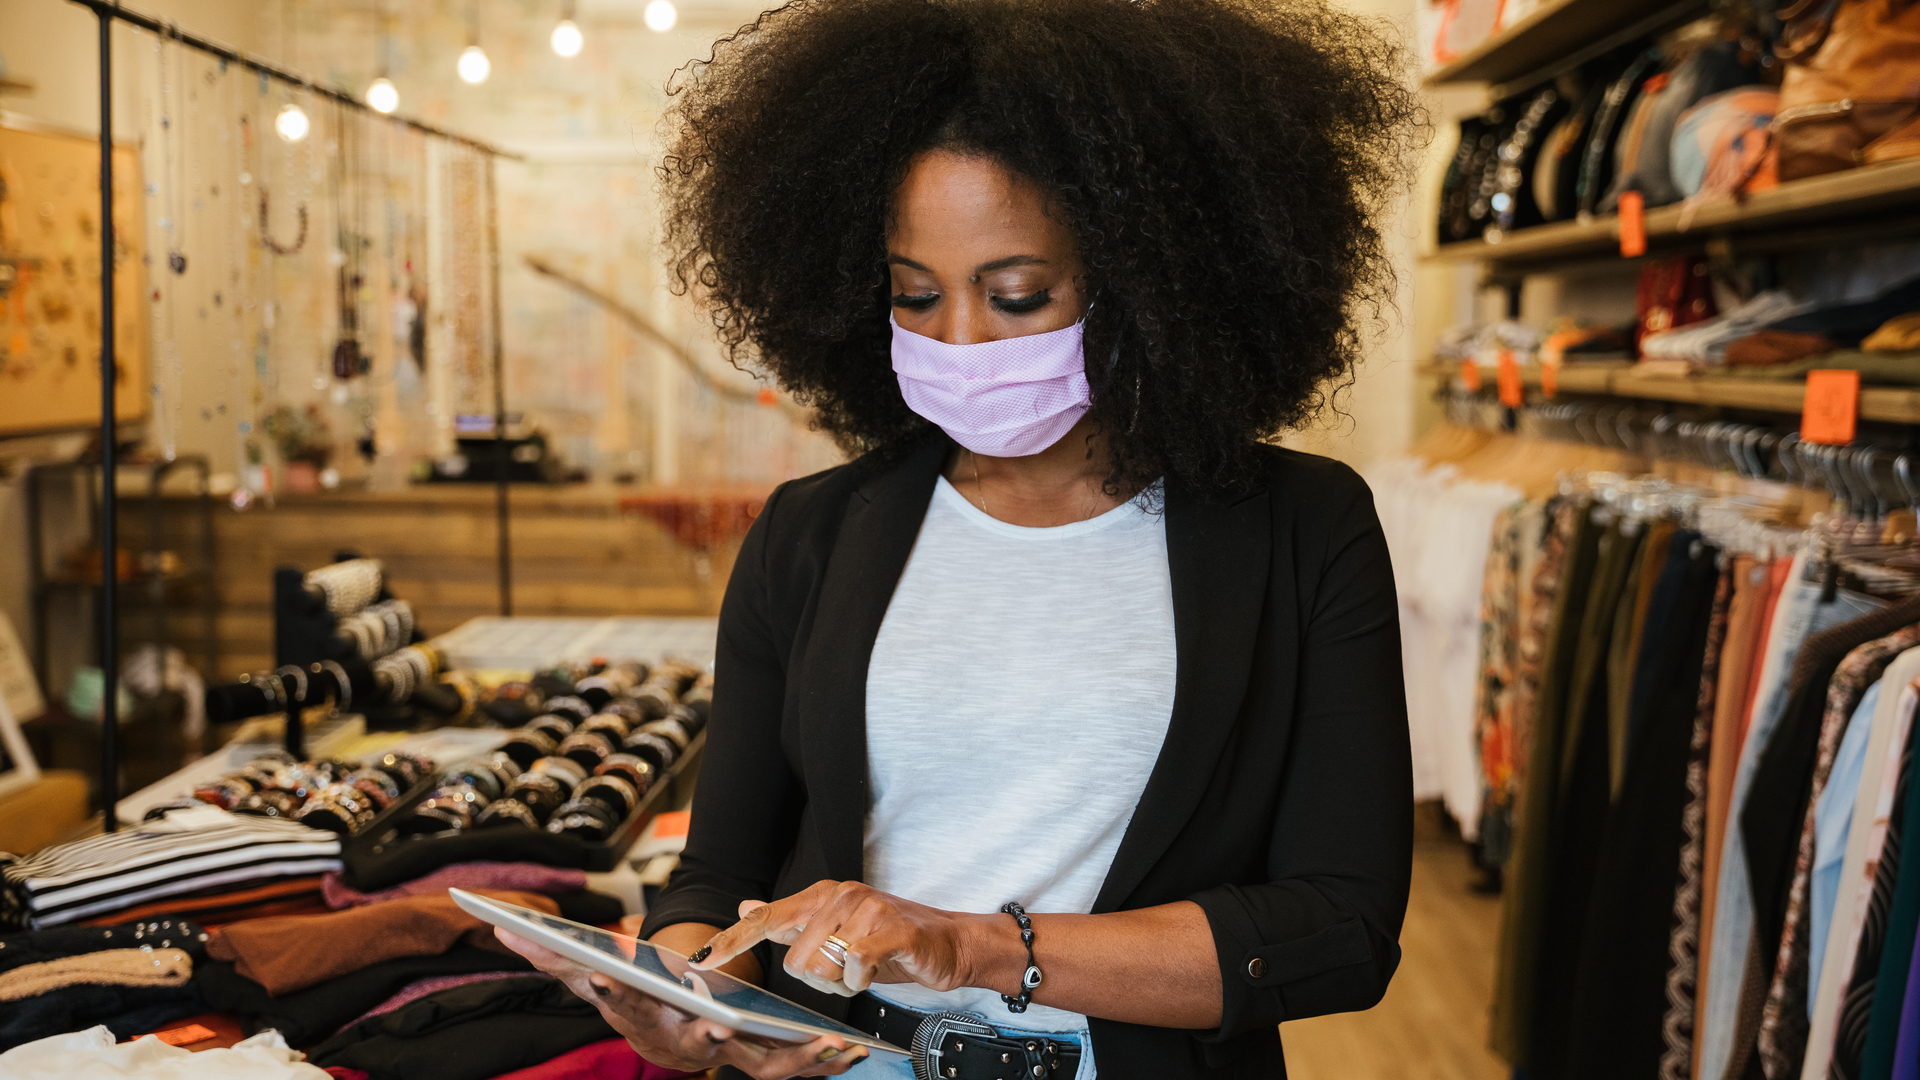 Clothing store owner wearing face mask uses tablet